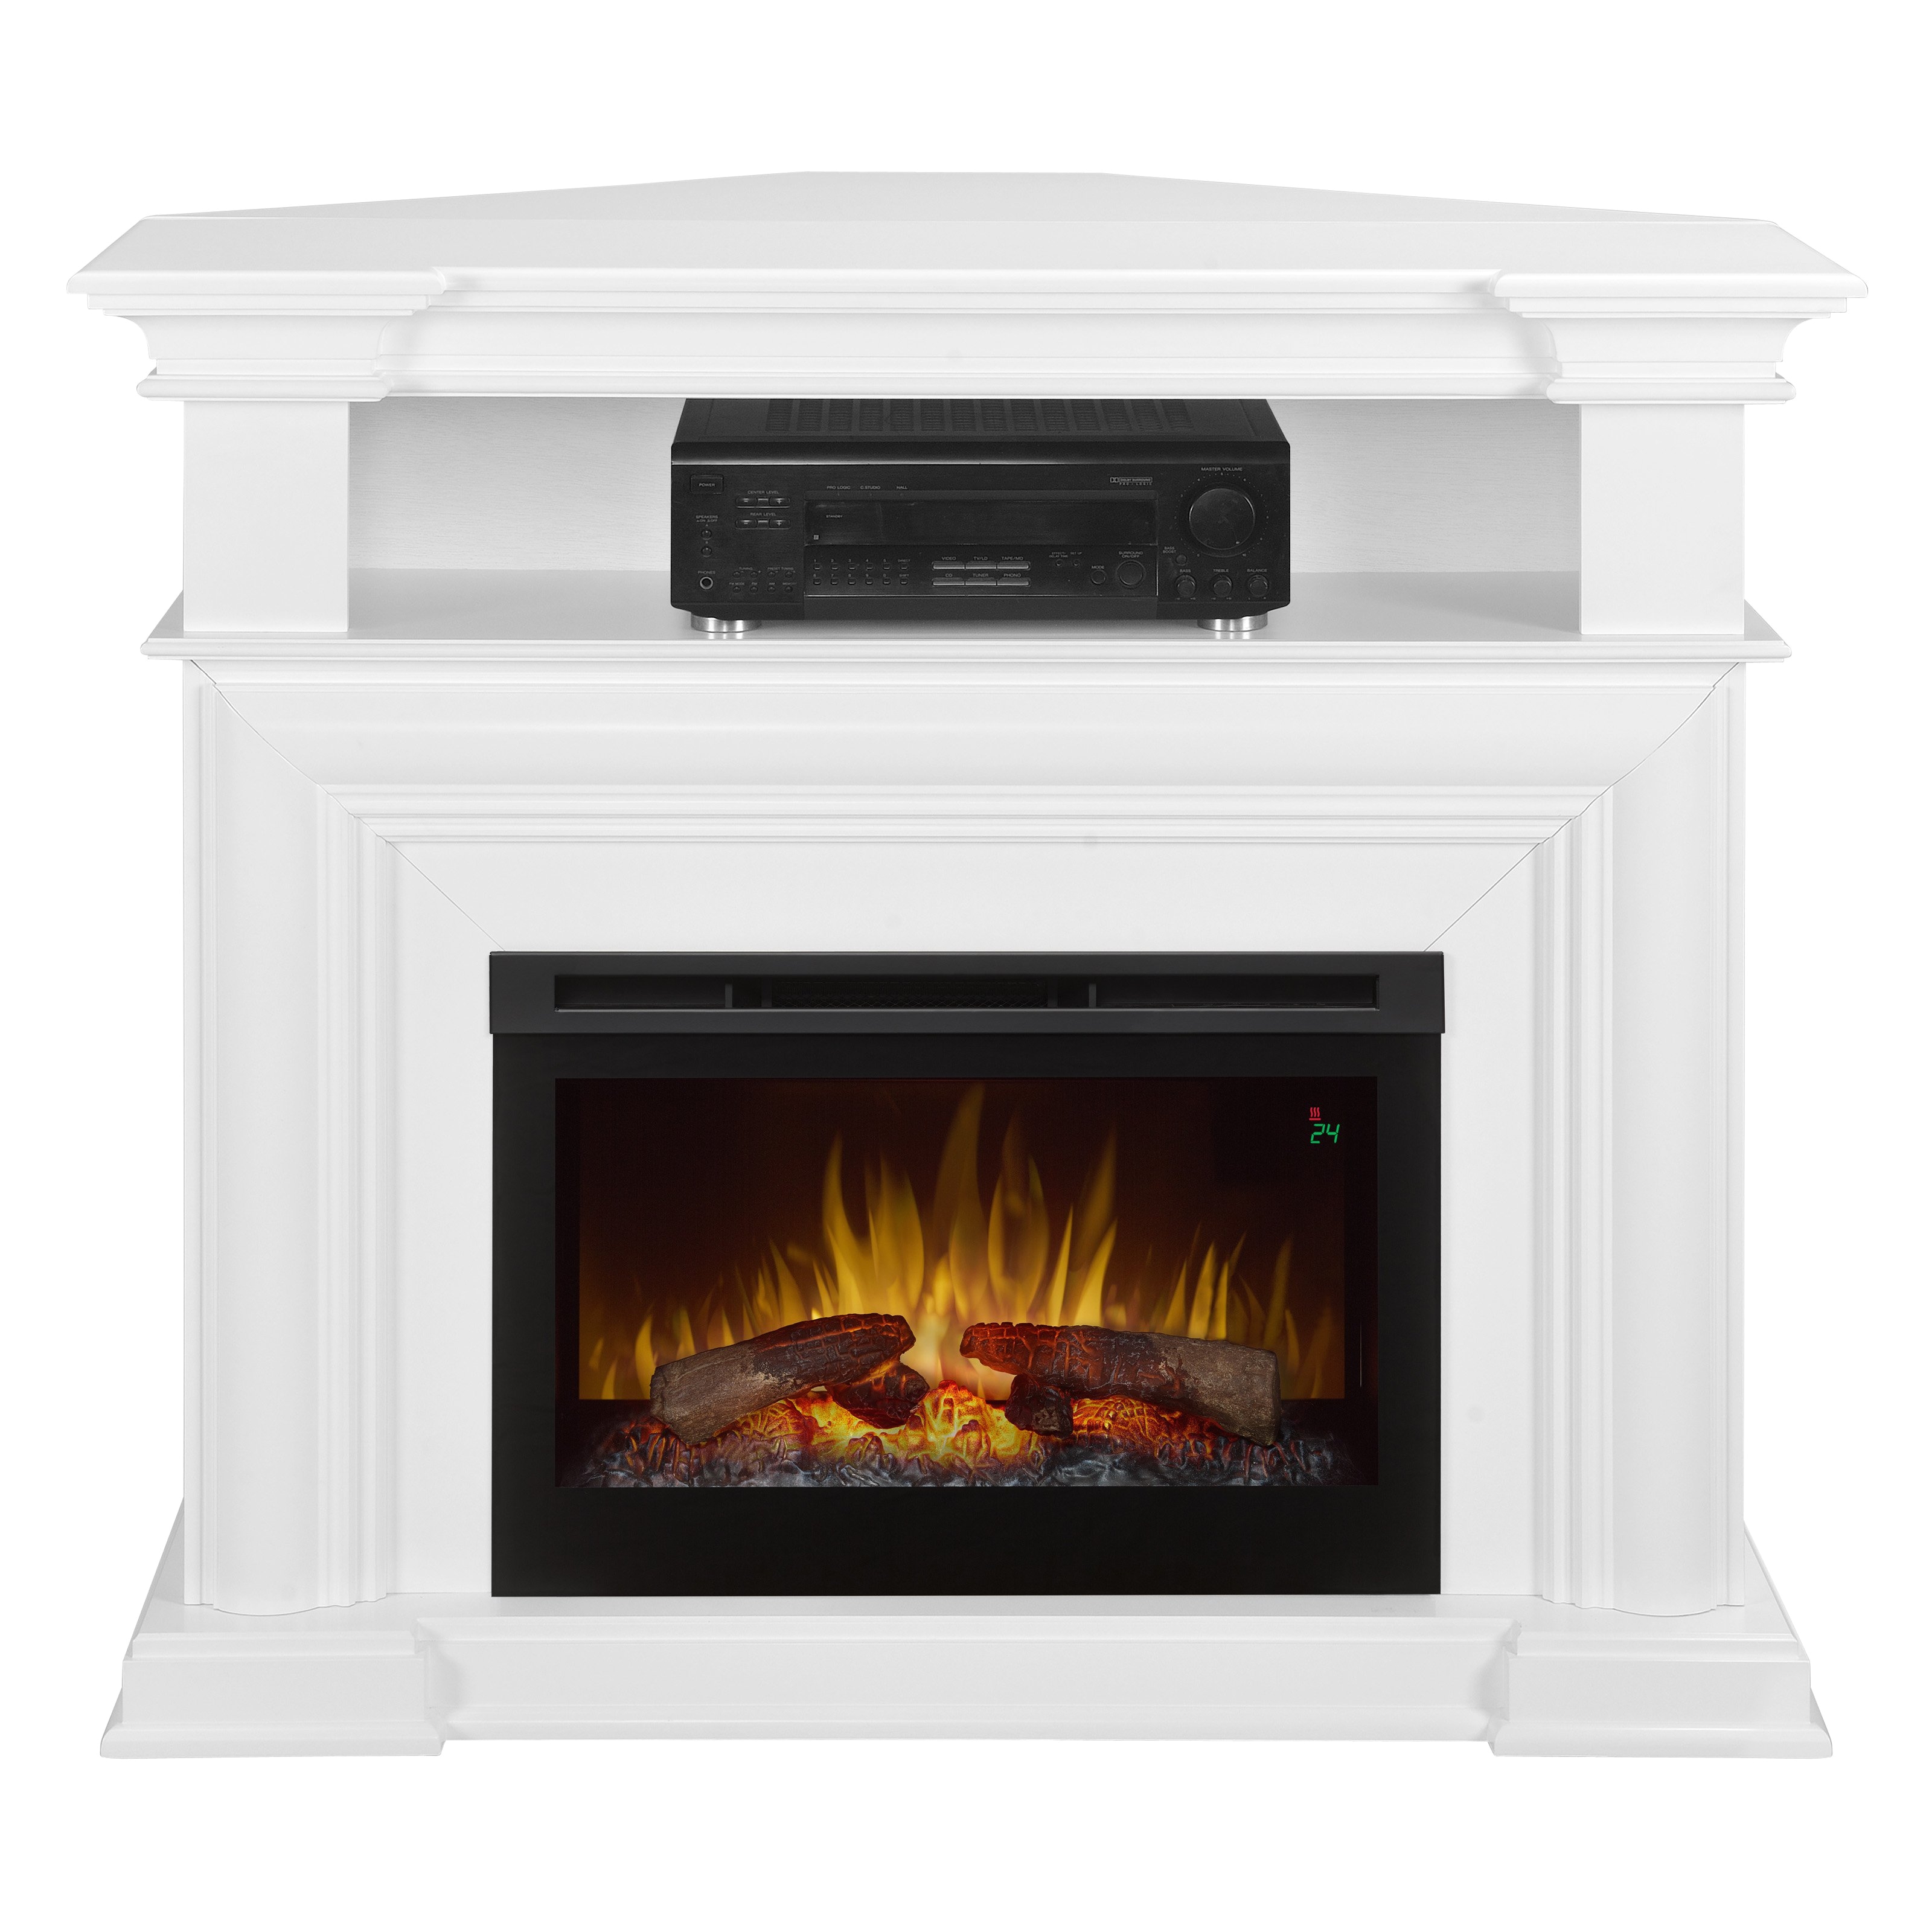 Painting Fireplace Insert Fresh Electric Log Inserts for Existing Fireplaces Natural Gas